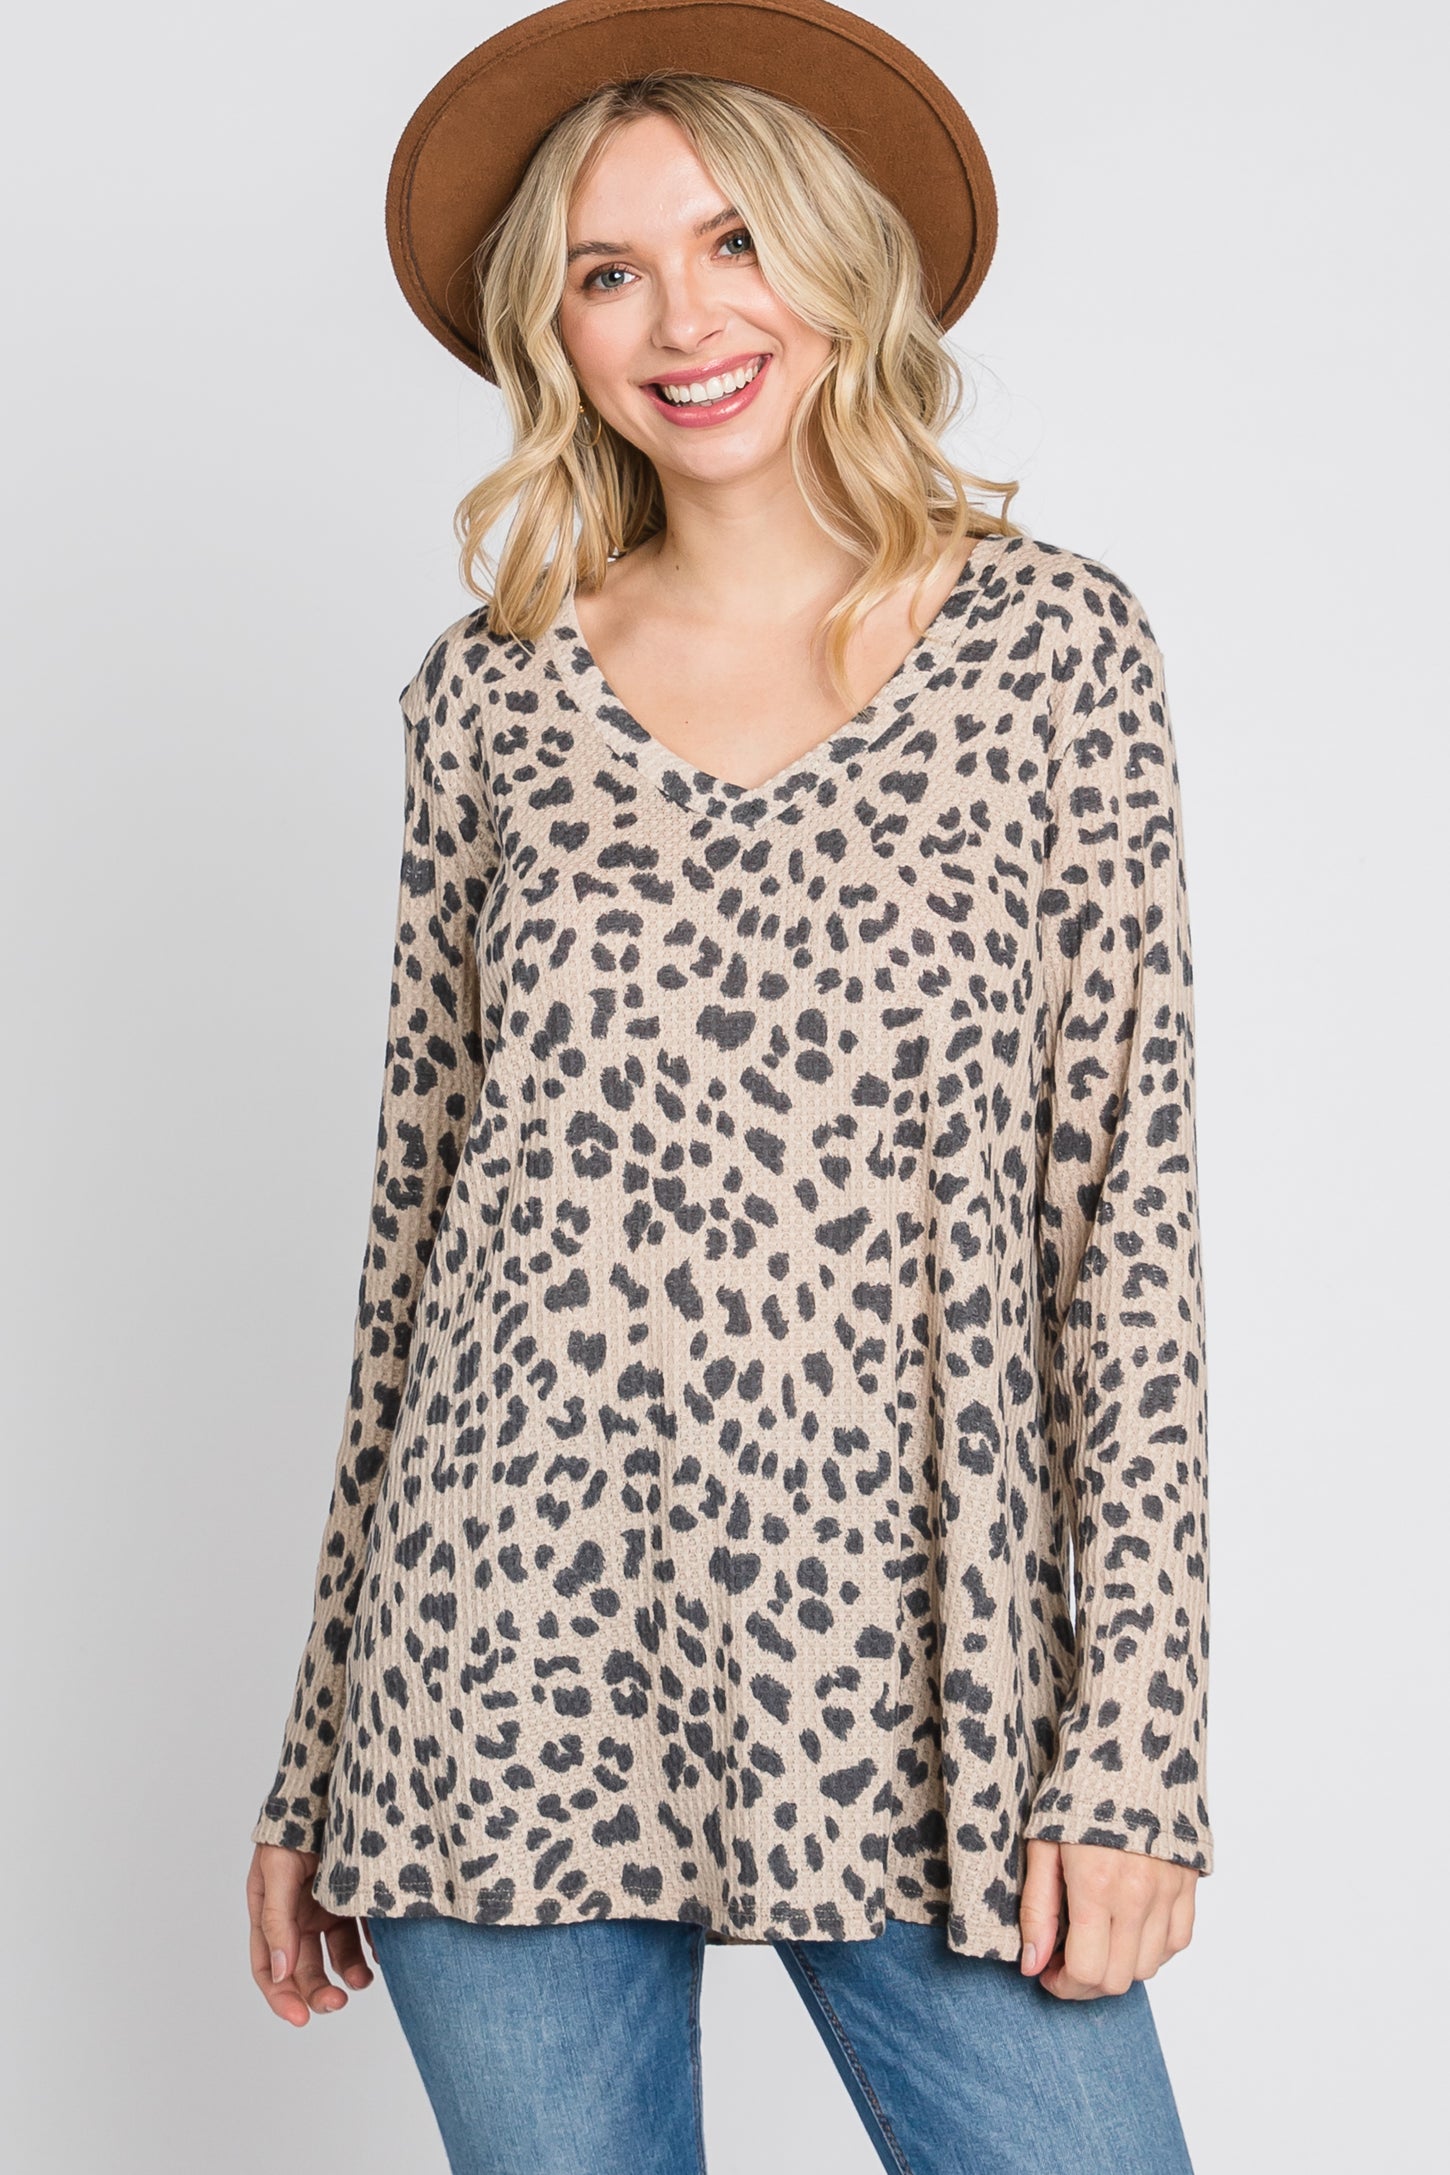 Taupe Leopard Print V-Neck Waffle Knit Top